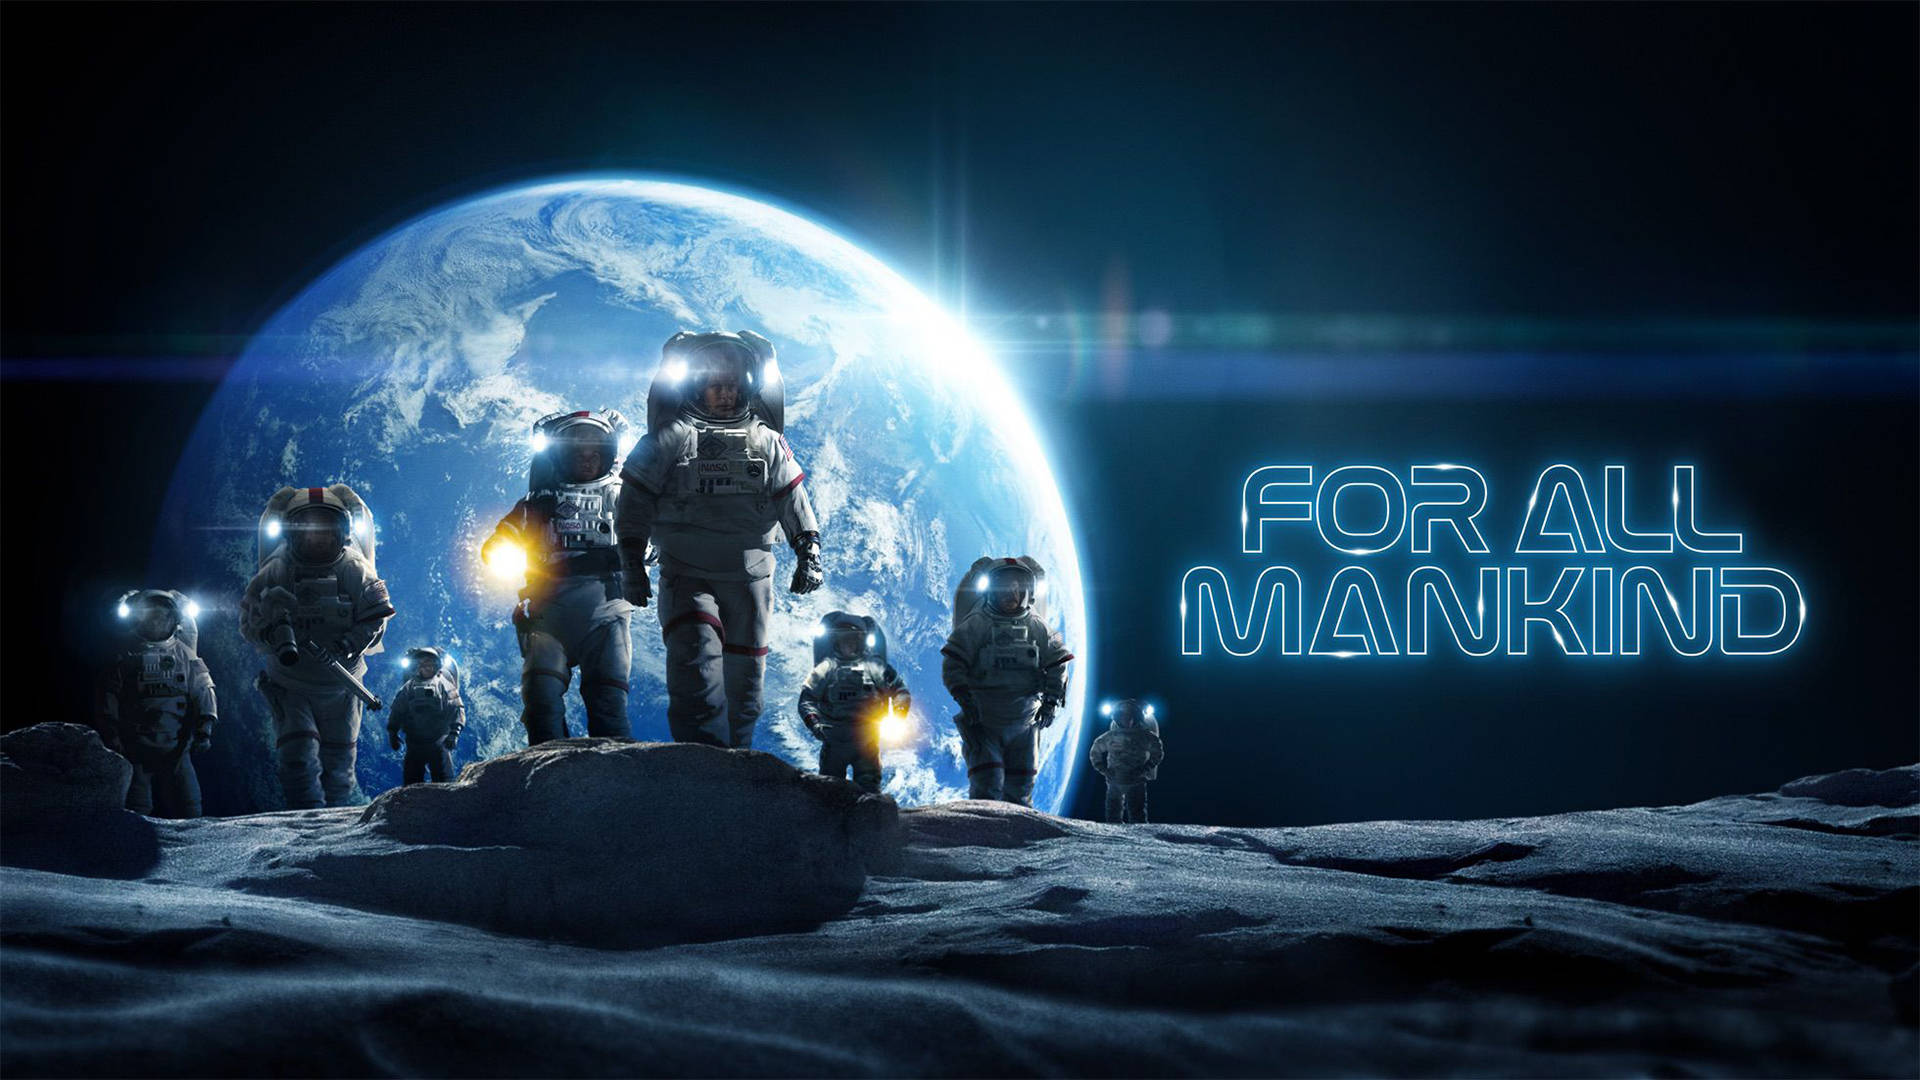 For All Mankind Arriving On The Moon